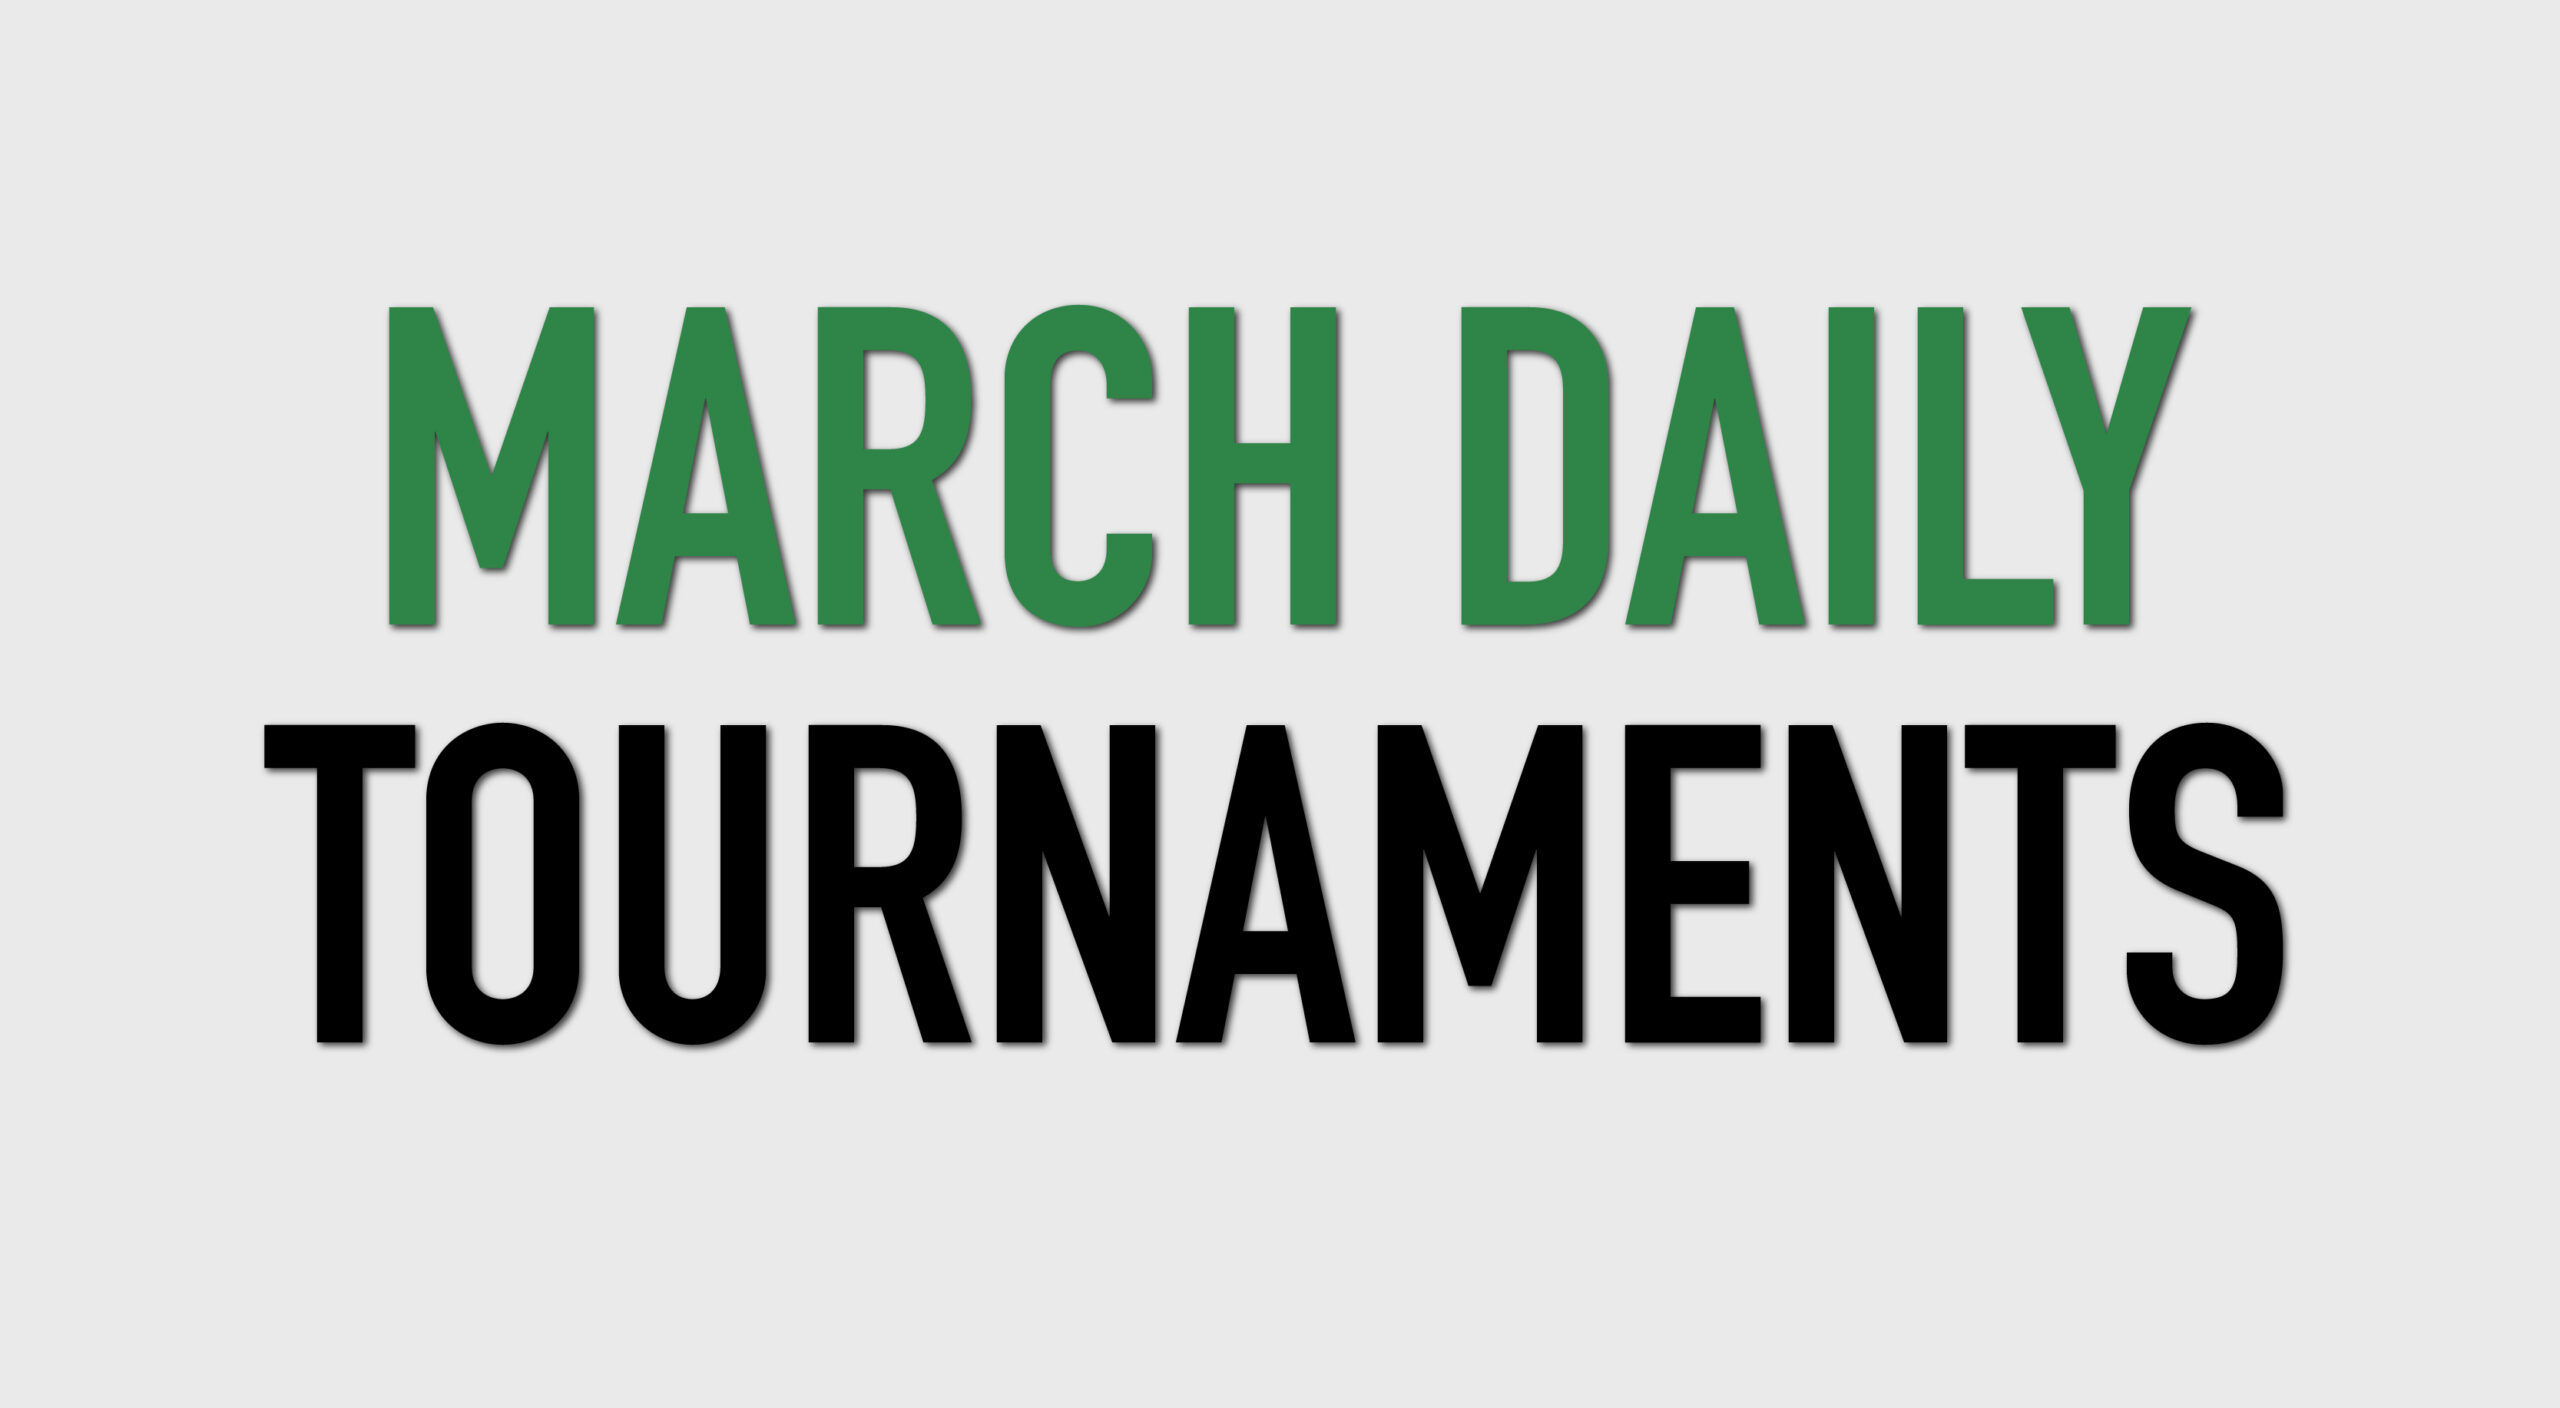 March Daily Tournament Schedule